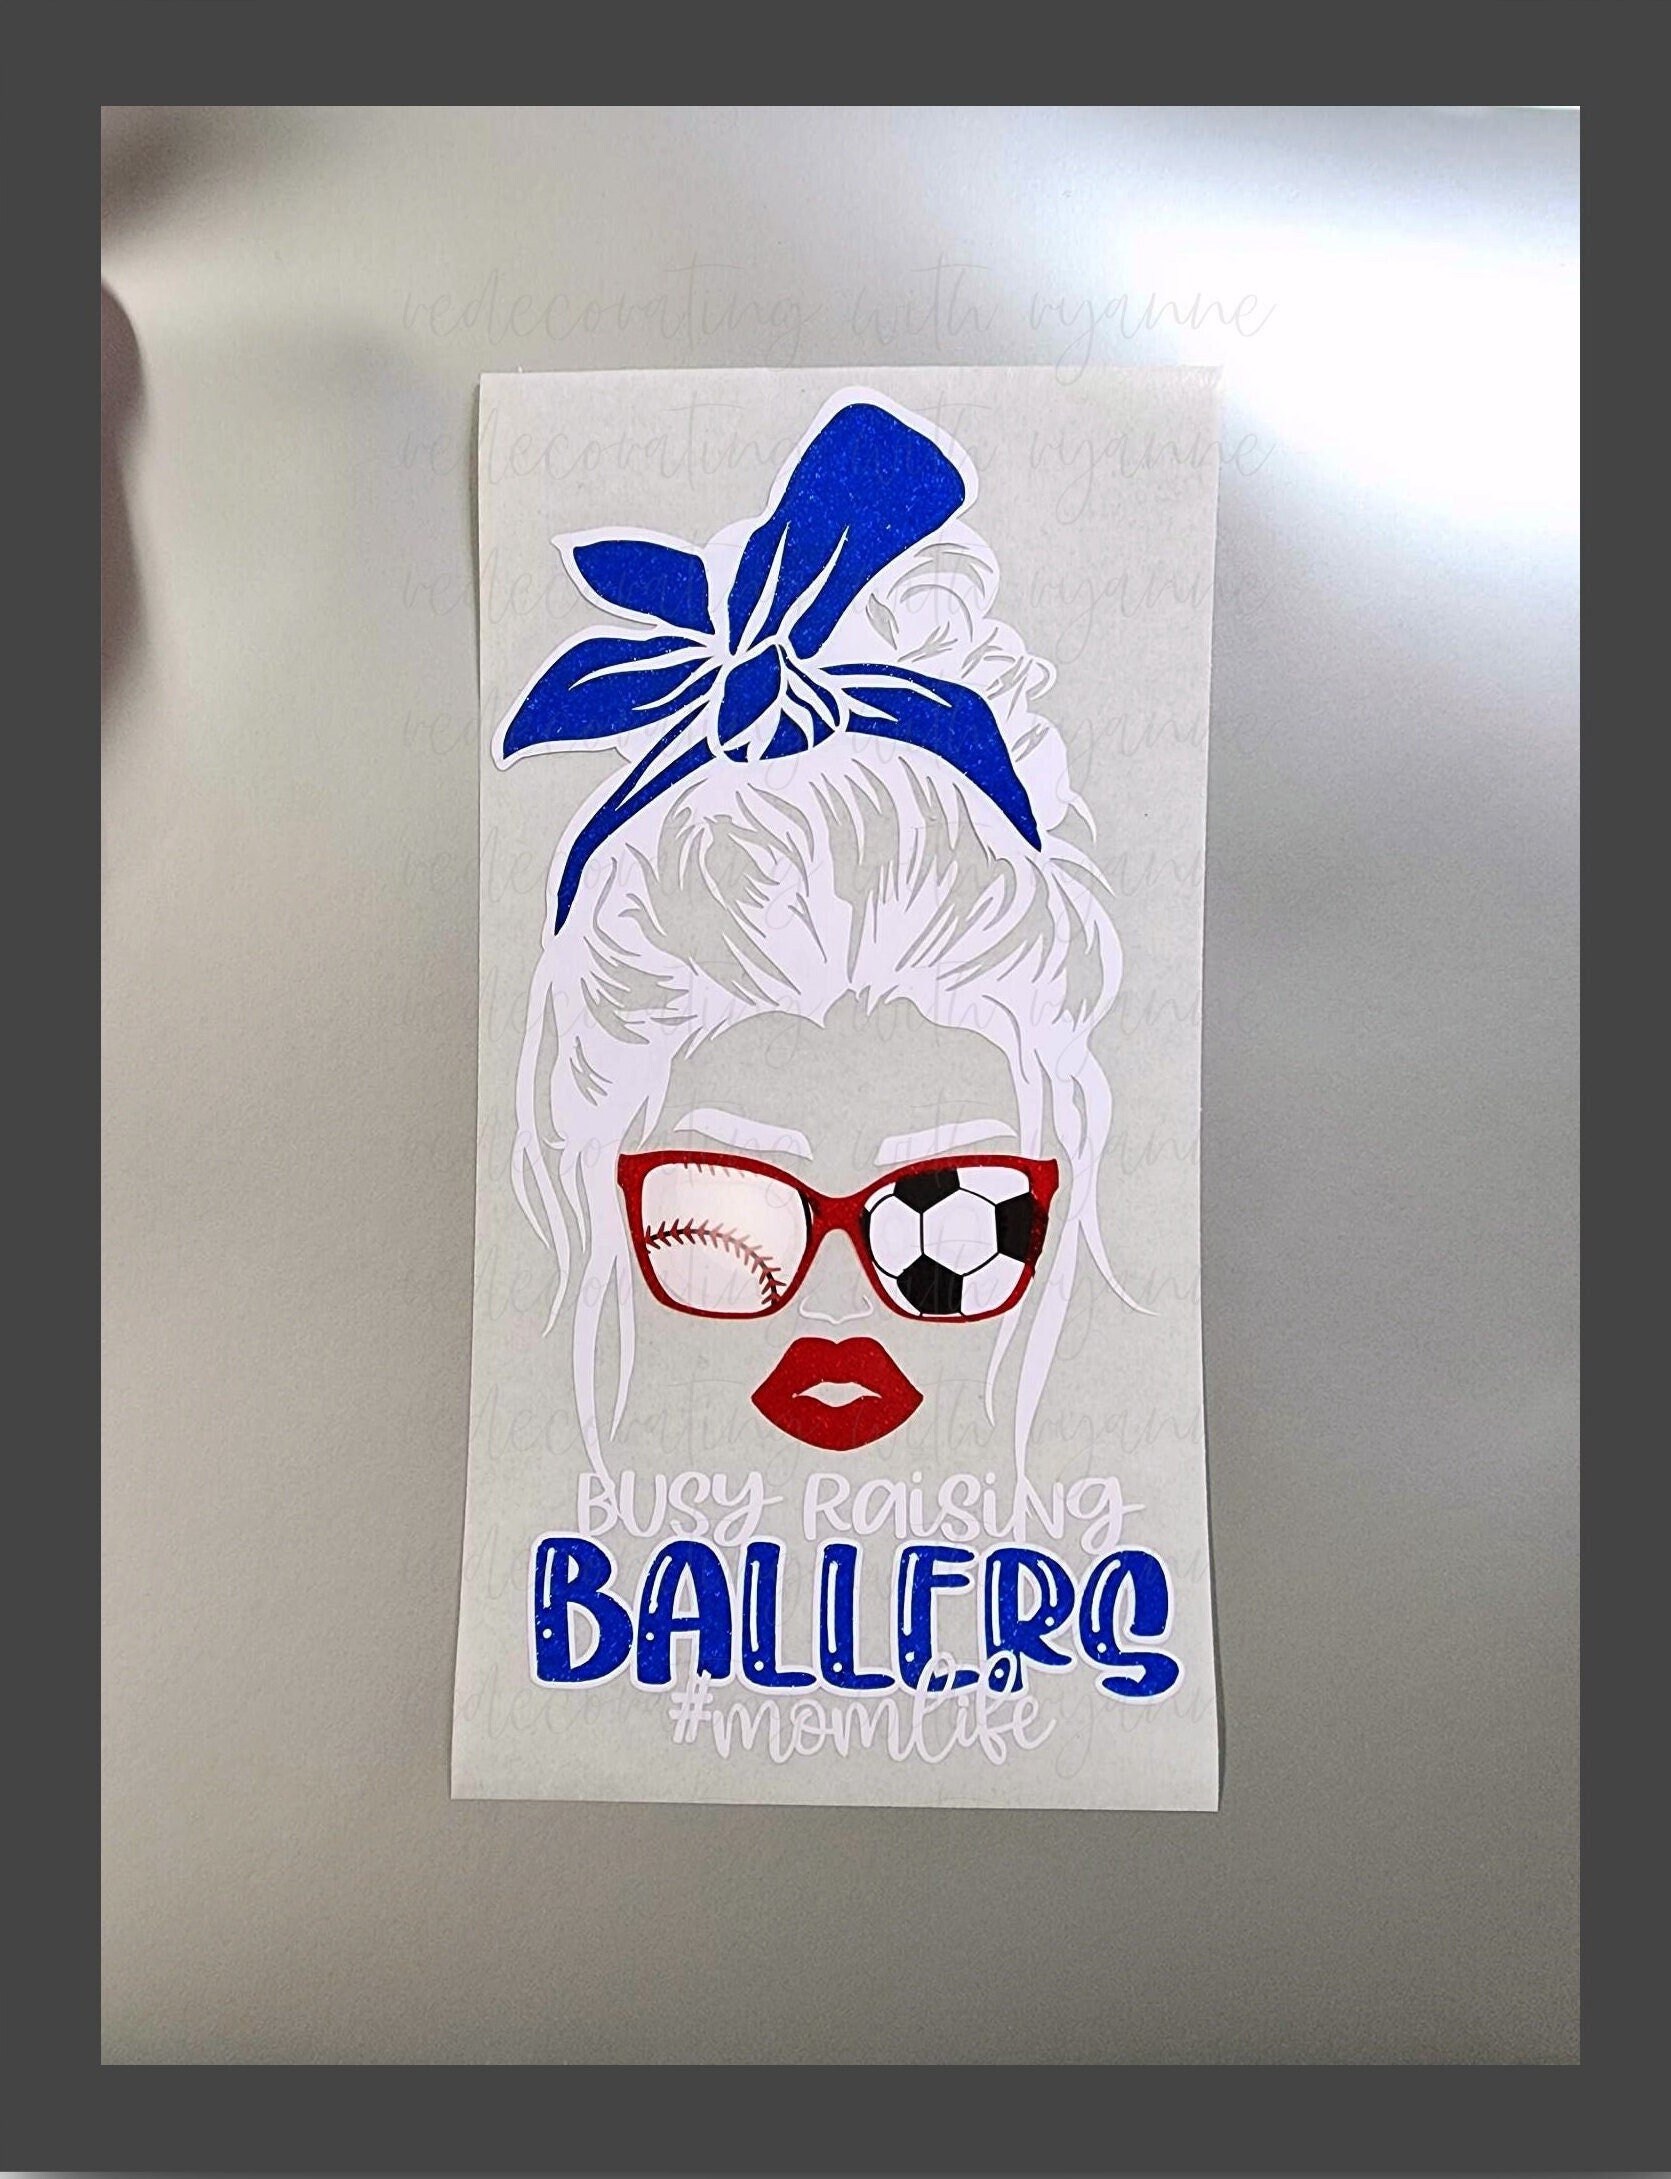 Baller Sticker for Sale by PianoMacPower